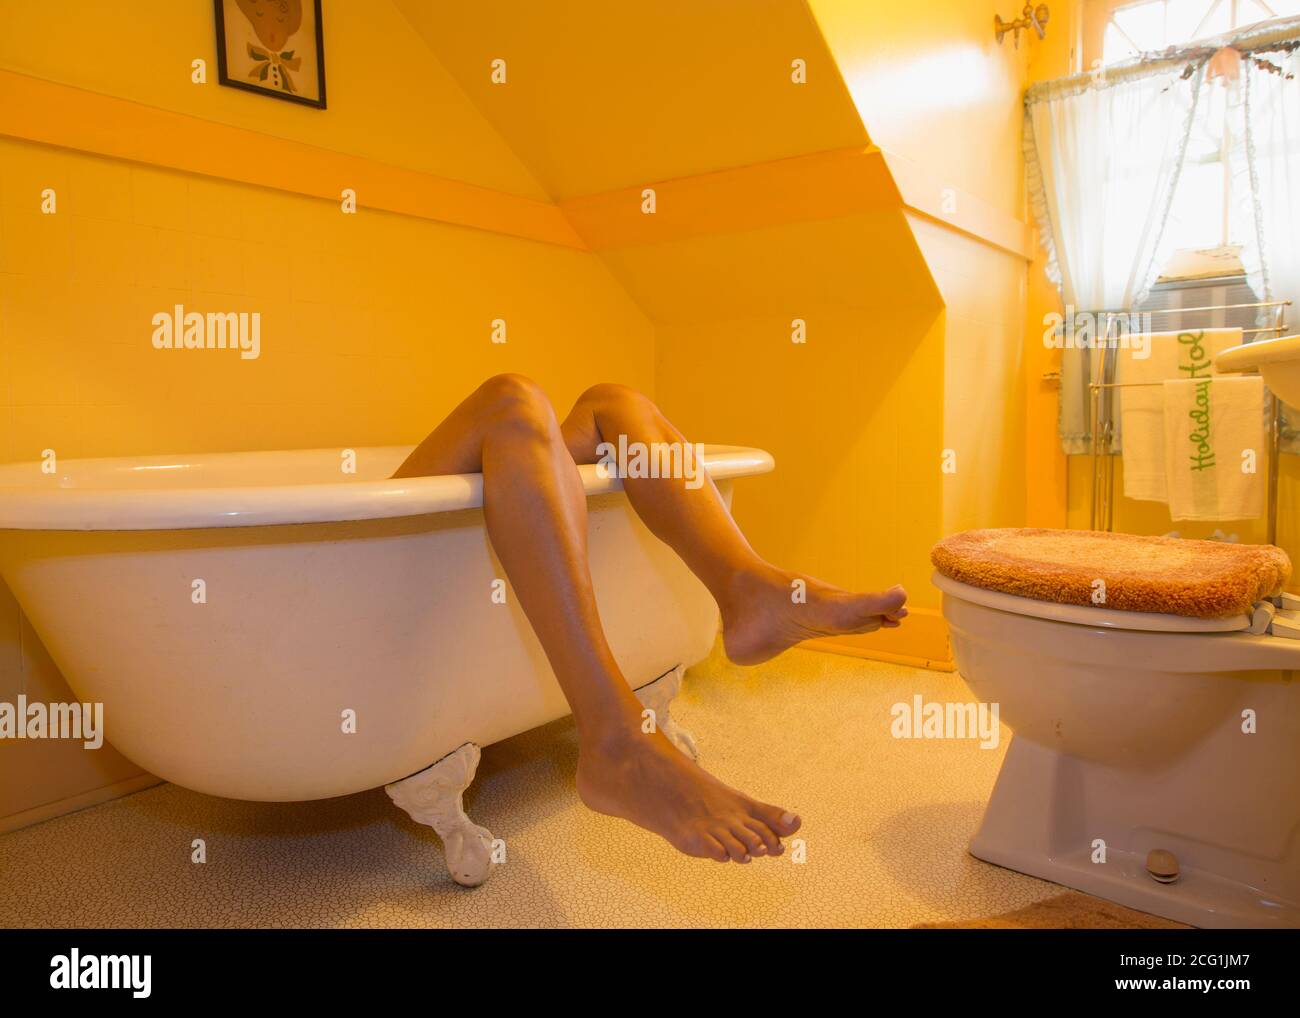 A woman's legs sticking out of a retro style claw-foot bathtub Stock Photo